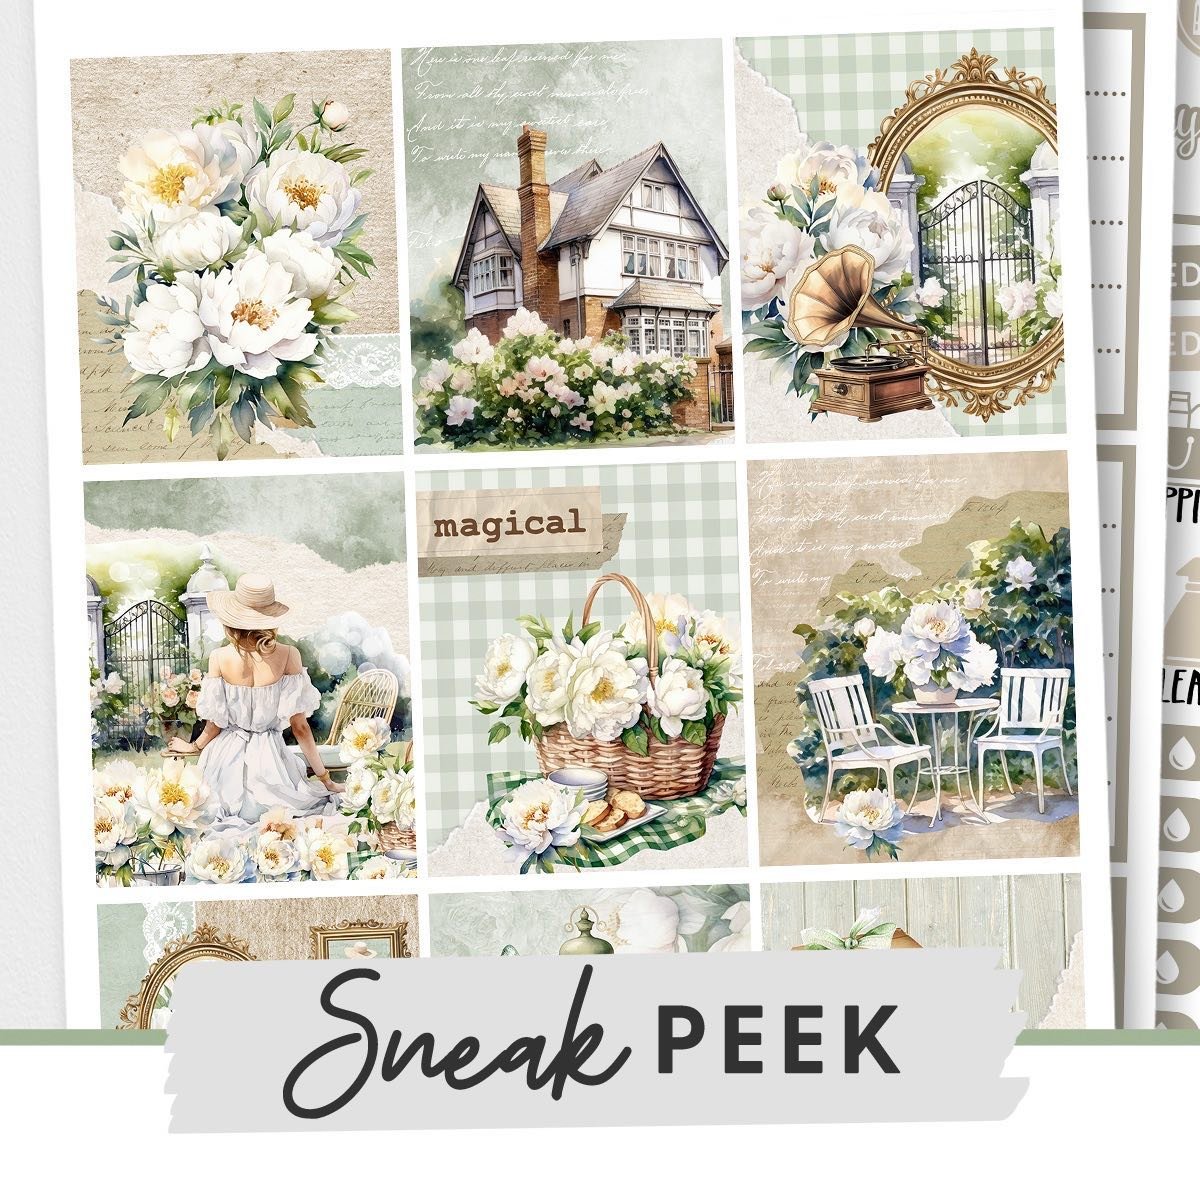 Hello everyone! Another sneak peek from Design Lovely Studio!.

The name of this collection is &quot;Timeless&quot; and it features a beautiful combination of floral and vintage vibes, making it perfect for creating nostalgic spring/summer layouts.

